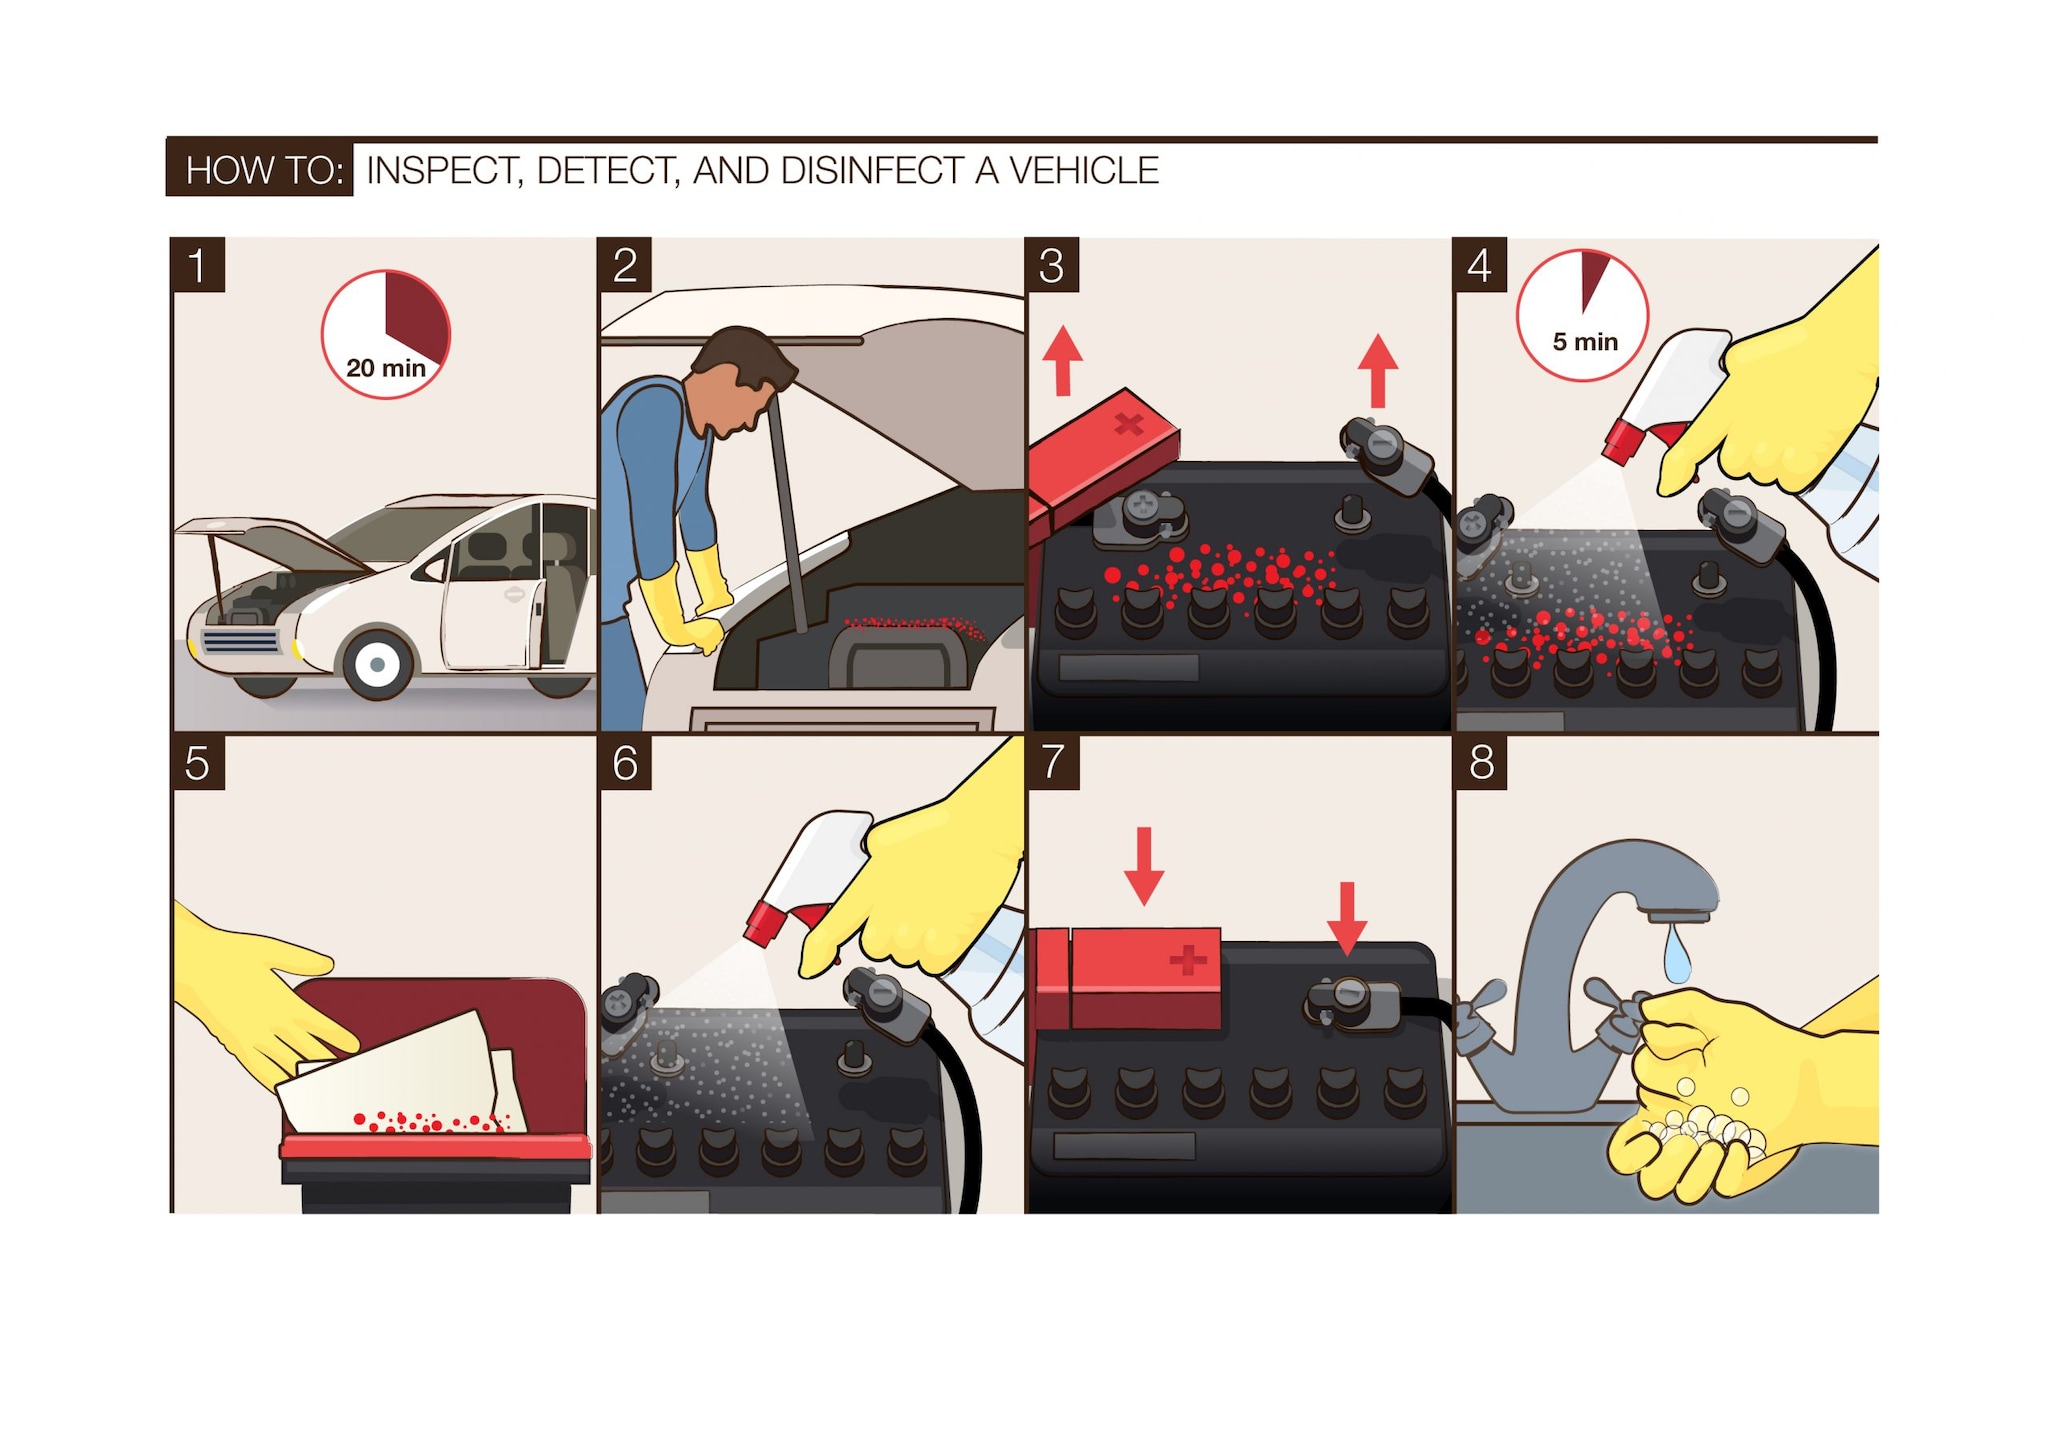 An illustration showing how a vehicle is inspected, detected and disinfected